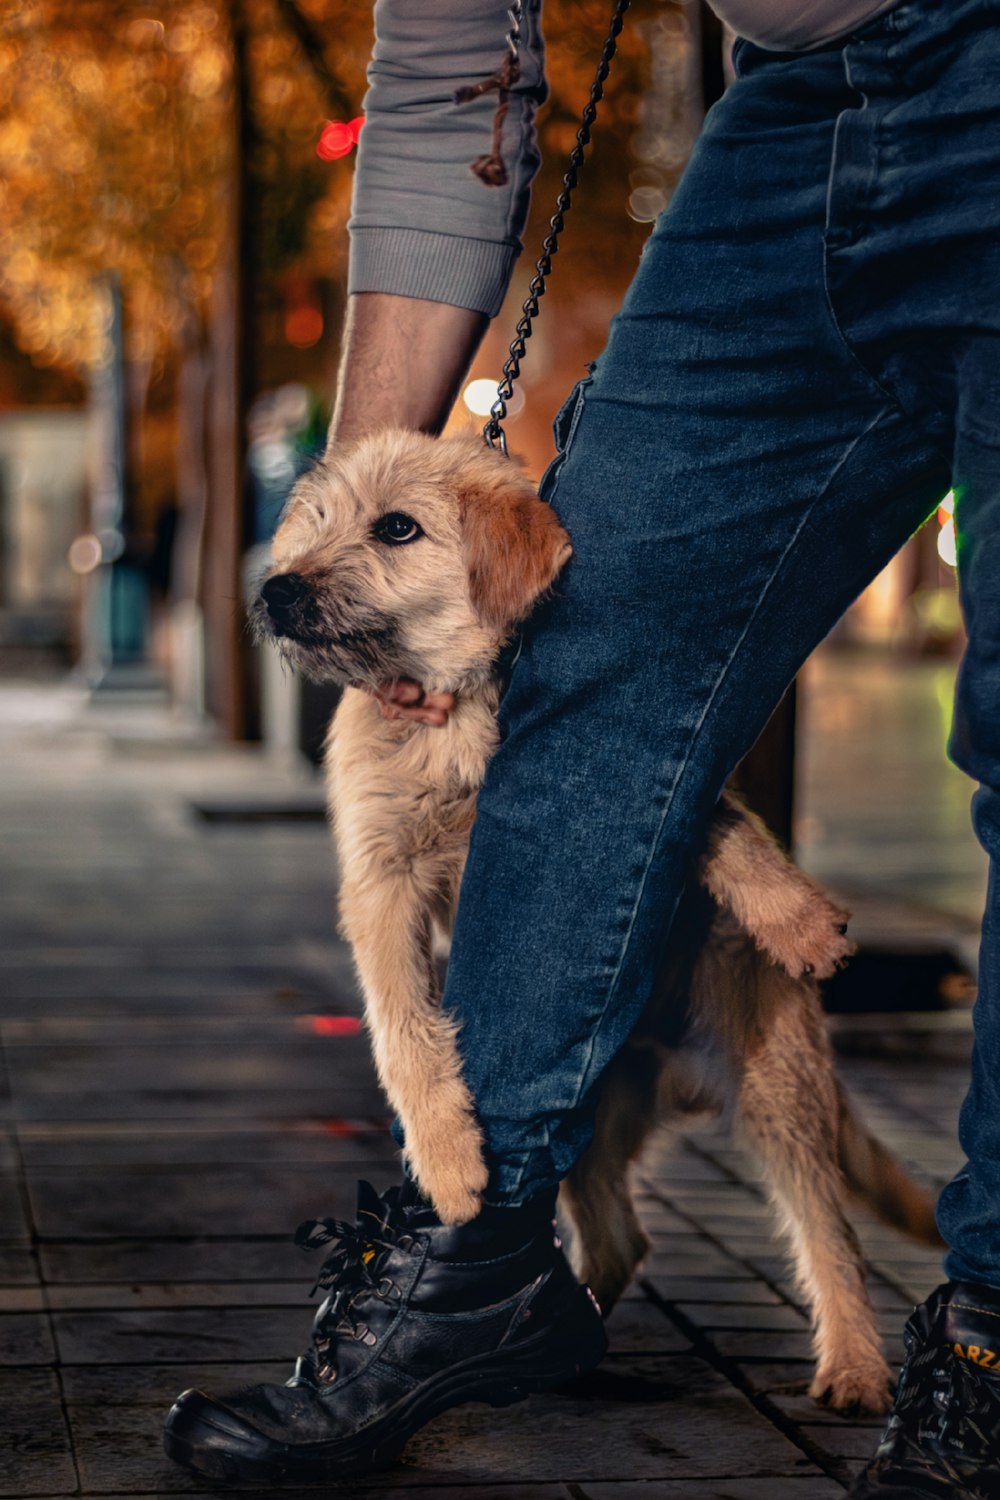 a person holding a dog on a leash